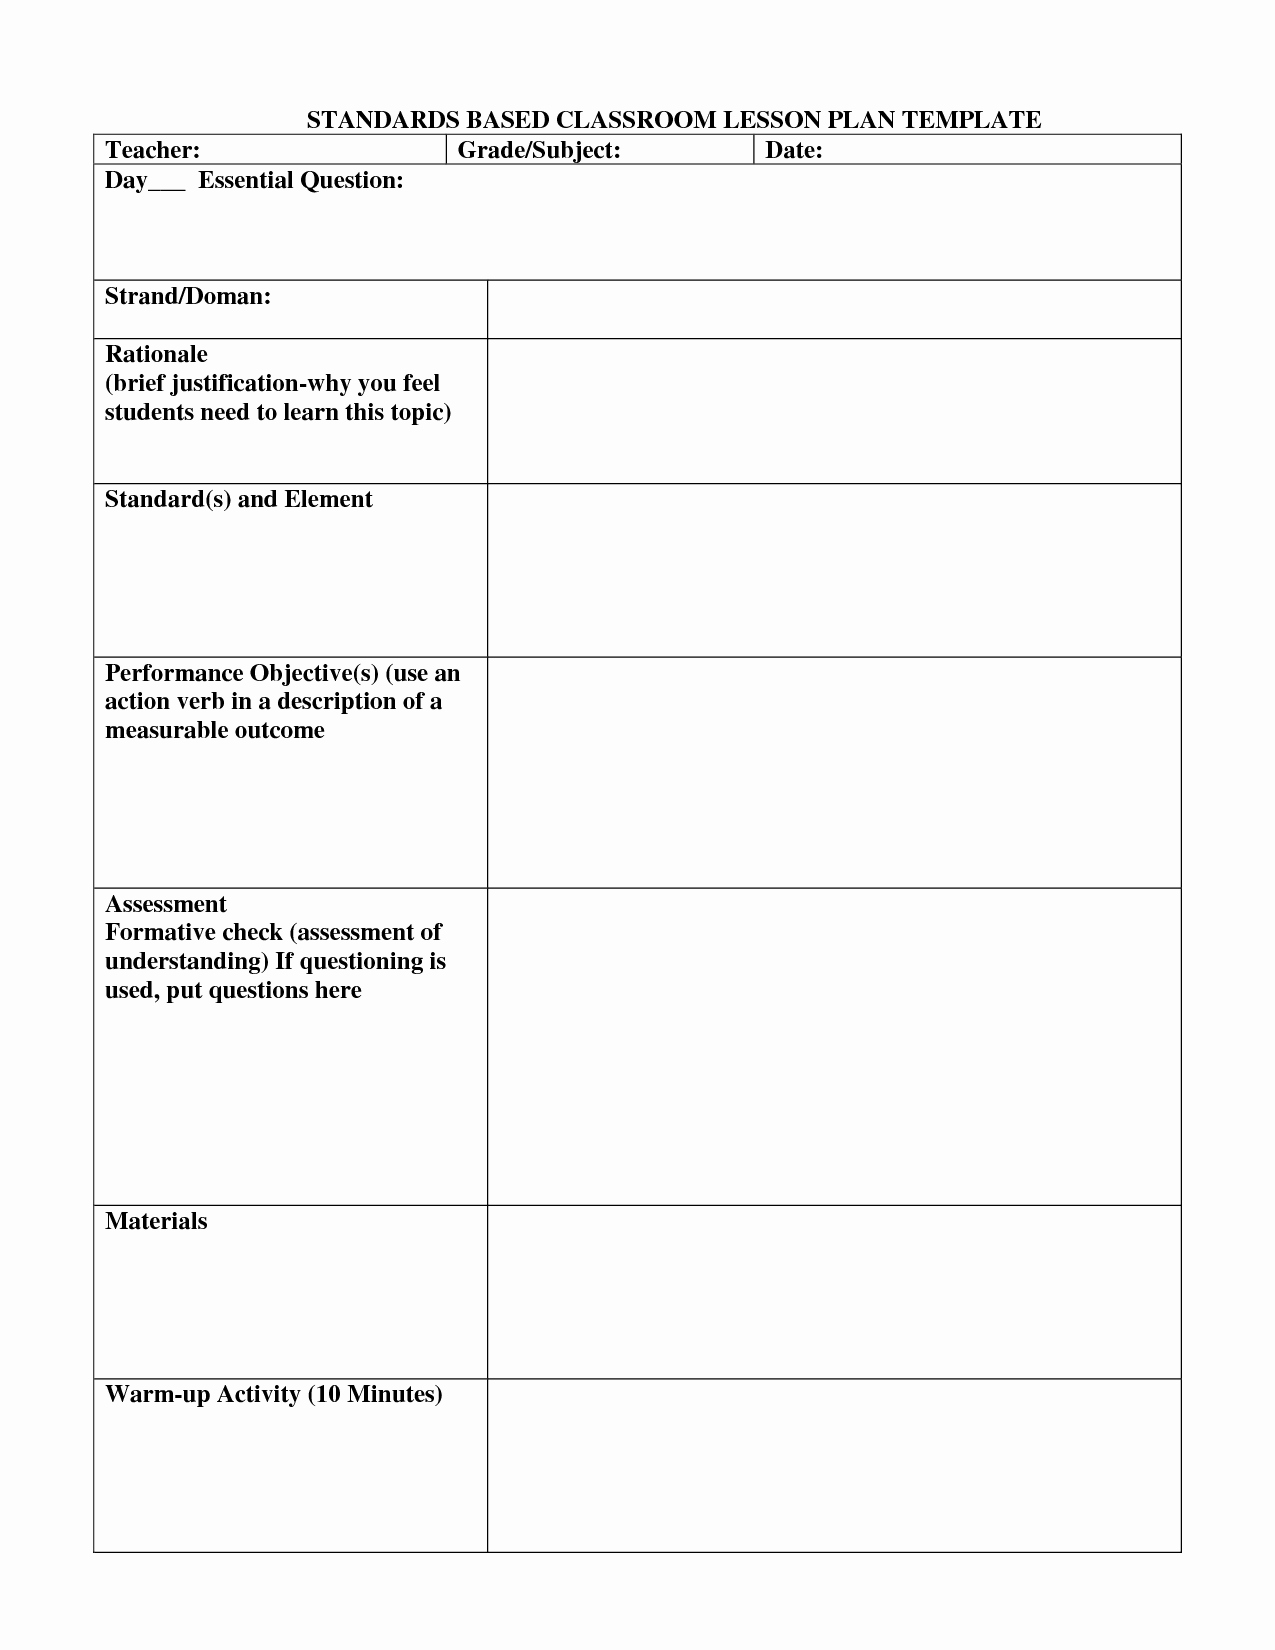 Standards Based Lesson Plan Template Awesome Standard Based Lesson Plans Template